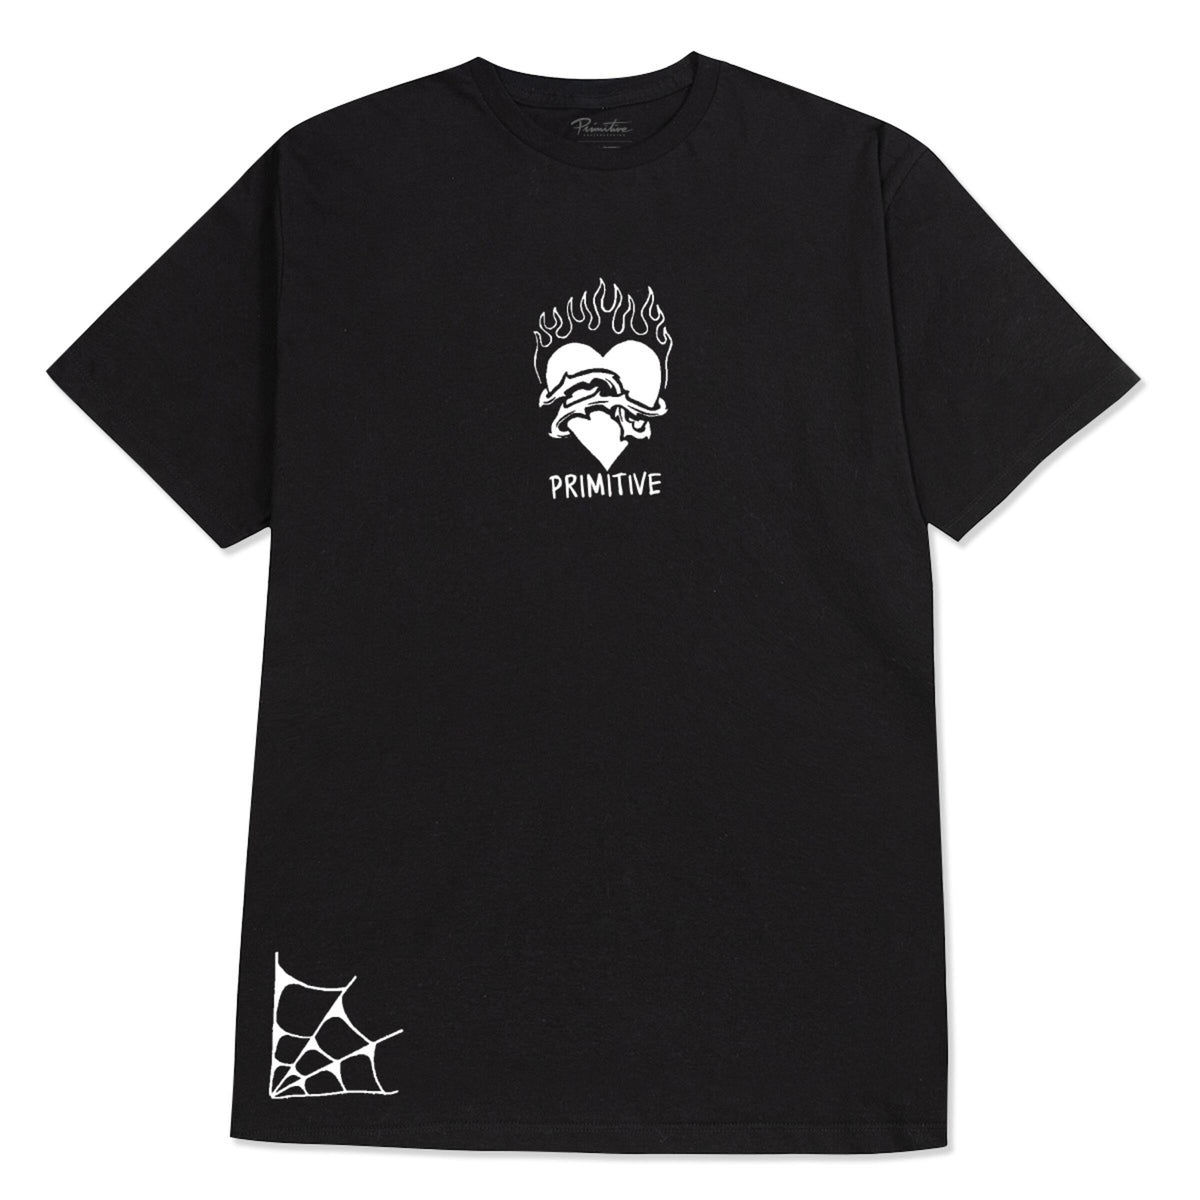 Primitive x Call of Duty Task Force Tee